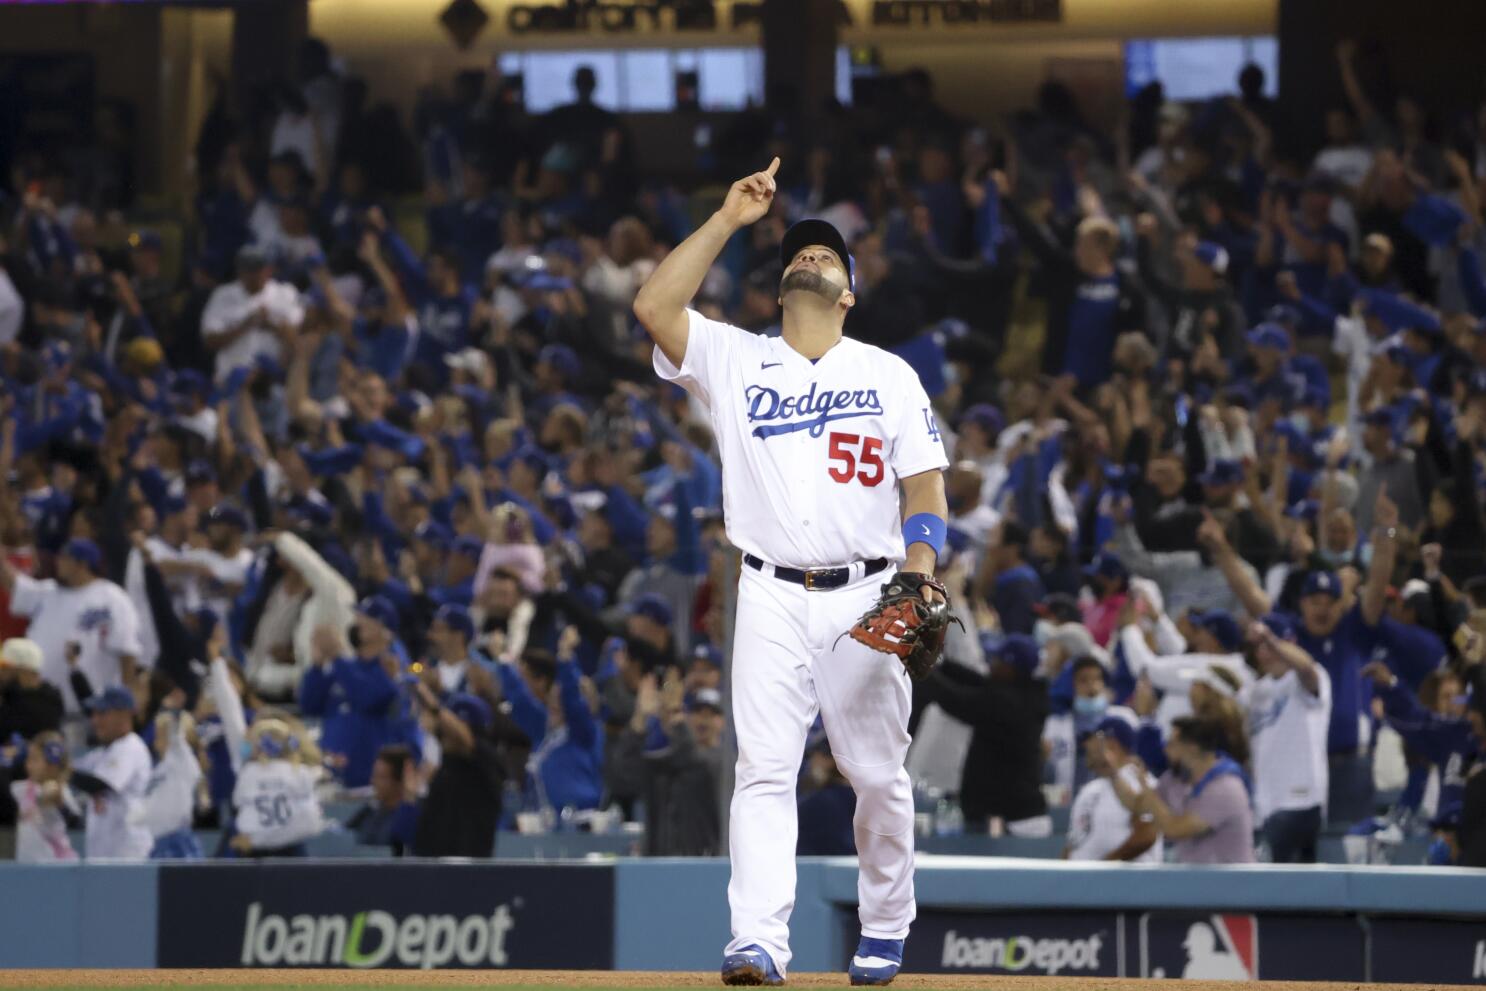 World Series: Three takeaways from the Dodgers' win in Game 1